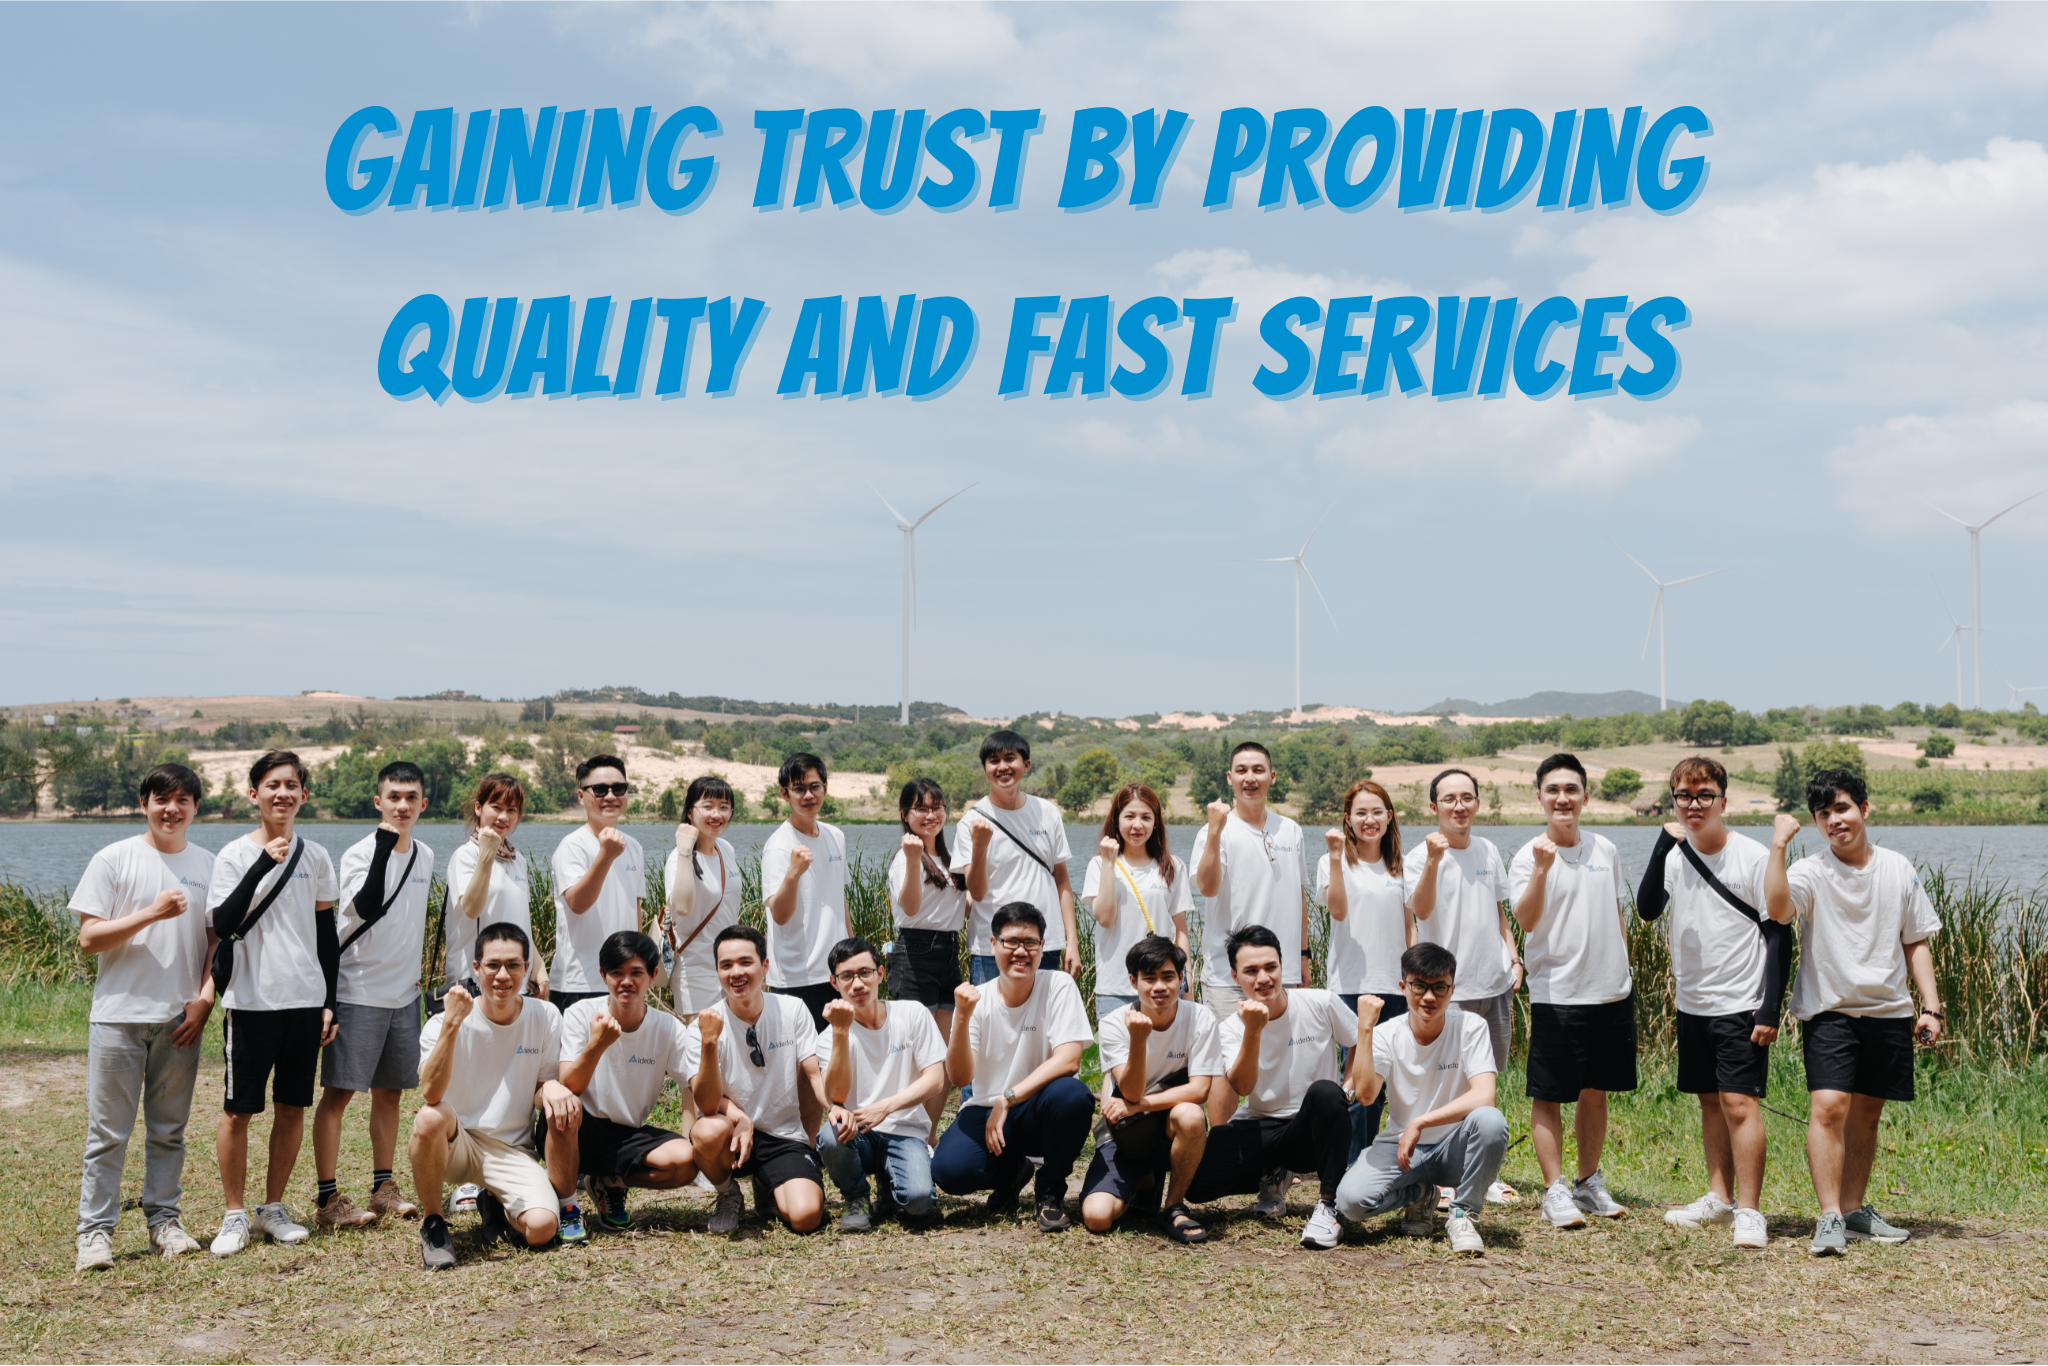 GAINING TRUST BY PROVIDING QUALITY AND FAST SERVICES